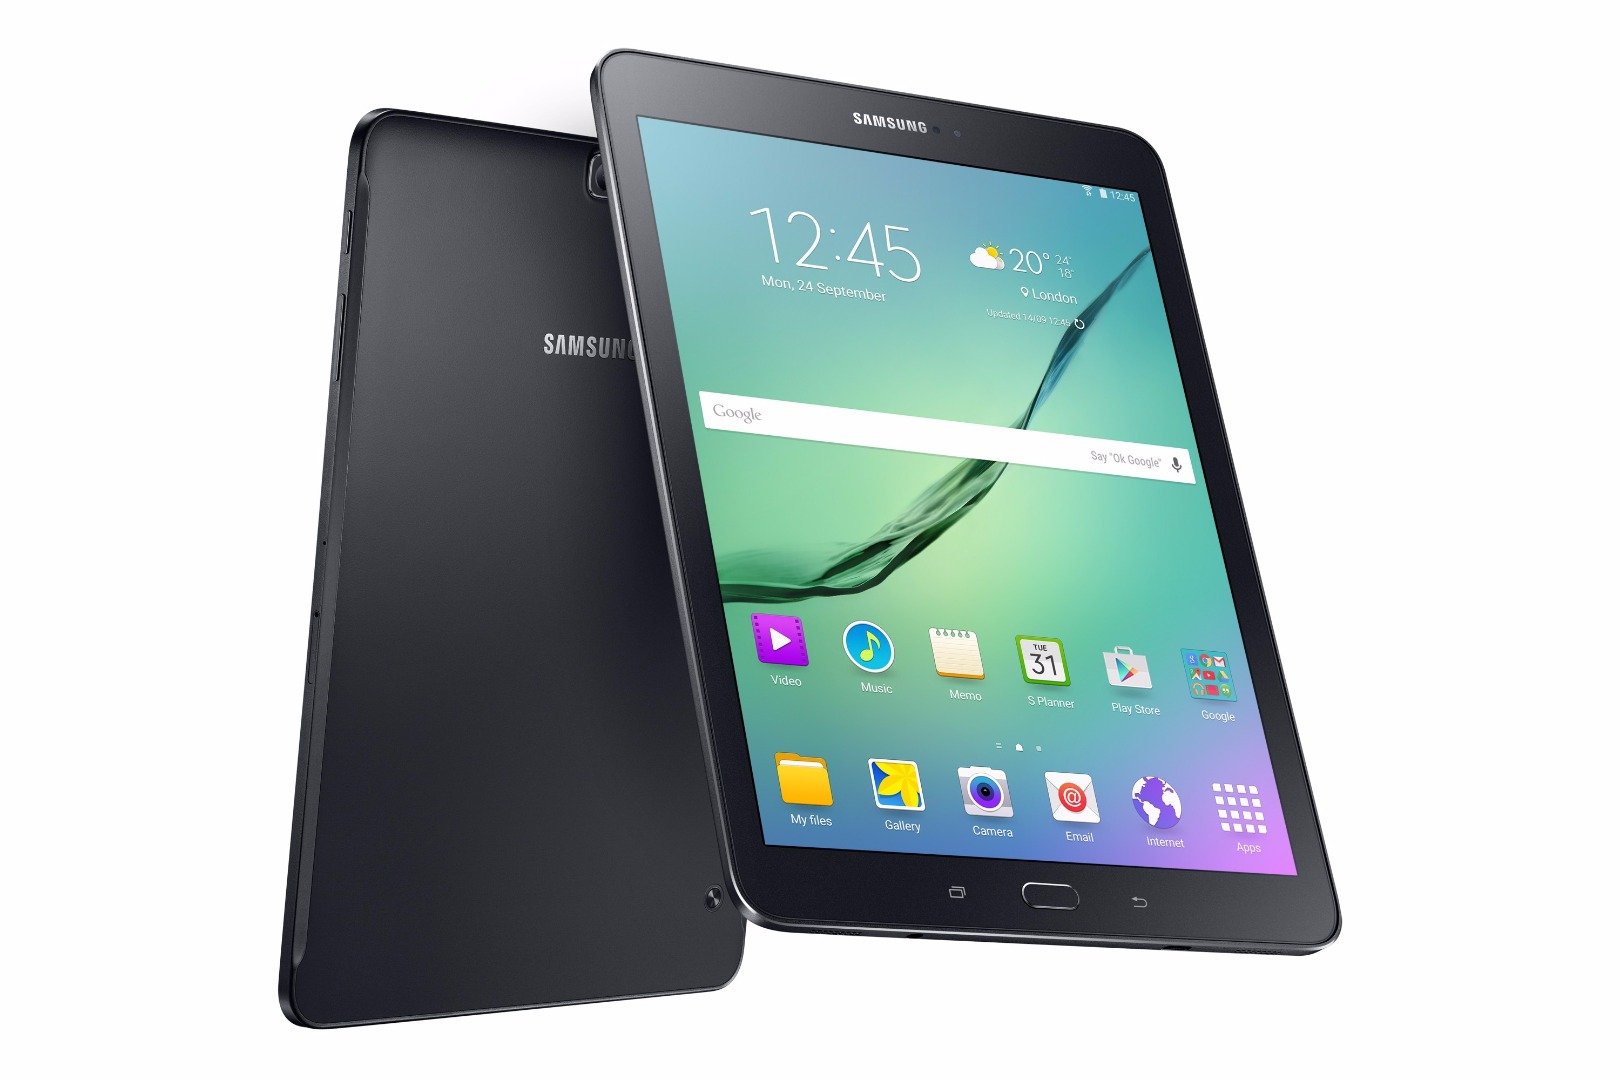 infrastructure sunflower physicist Galaxy Tab S2 vs Galaxy Tab S: what's changed? - Android Authority